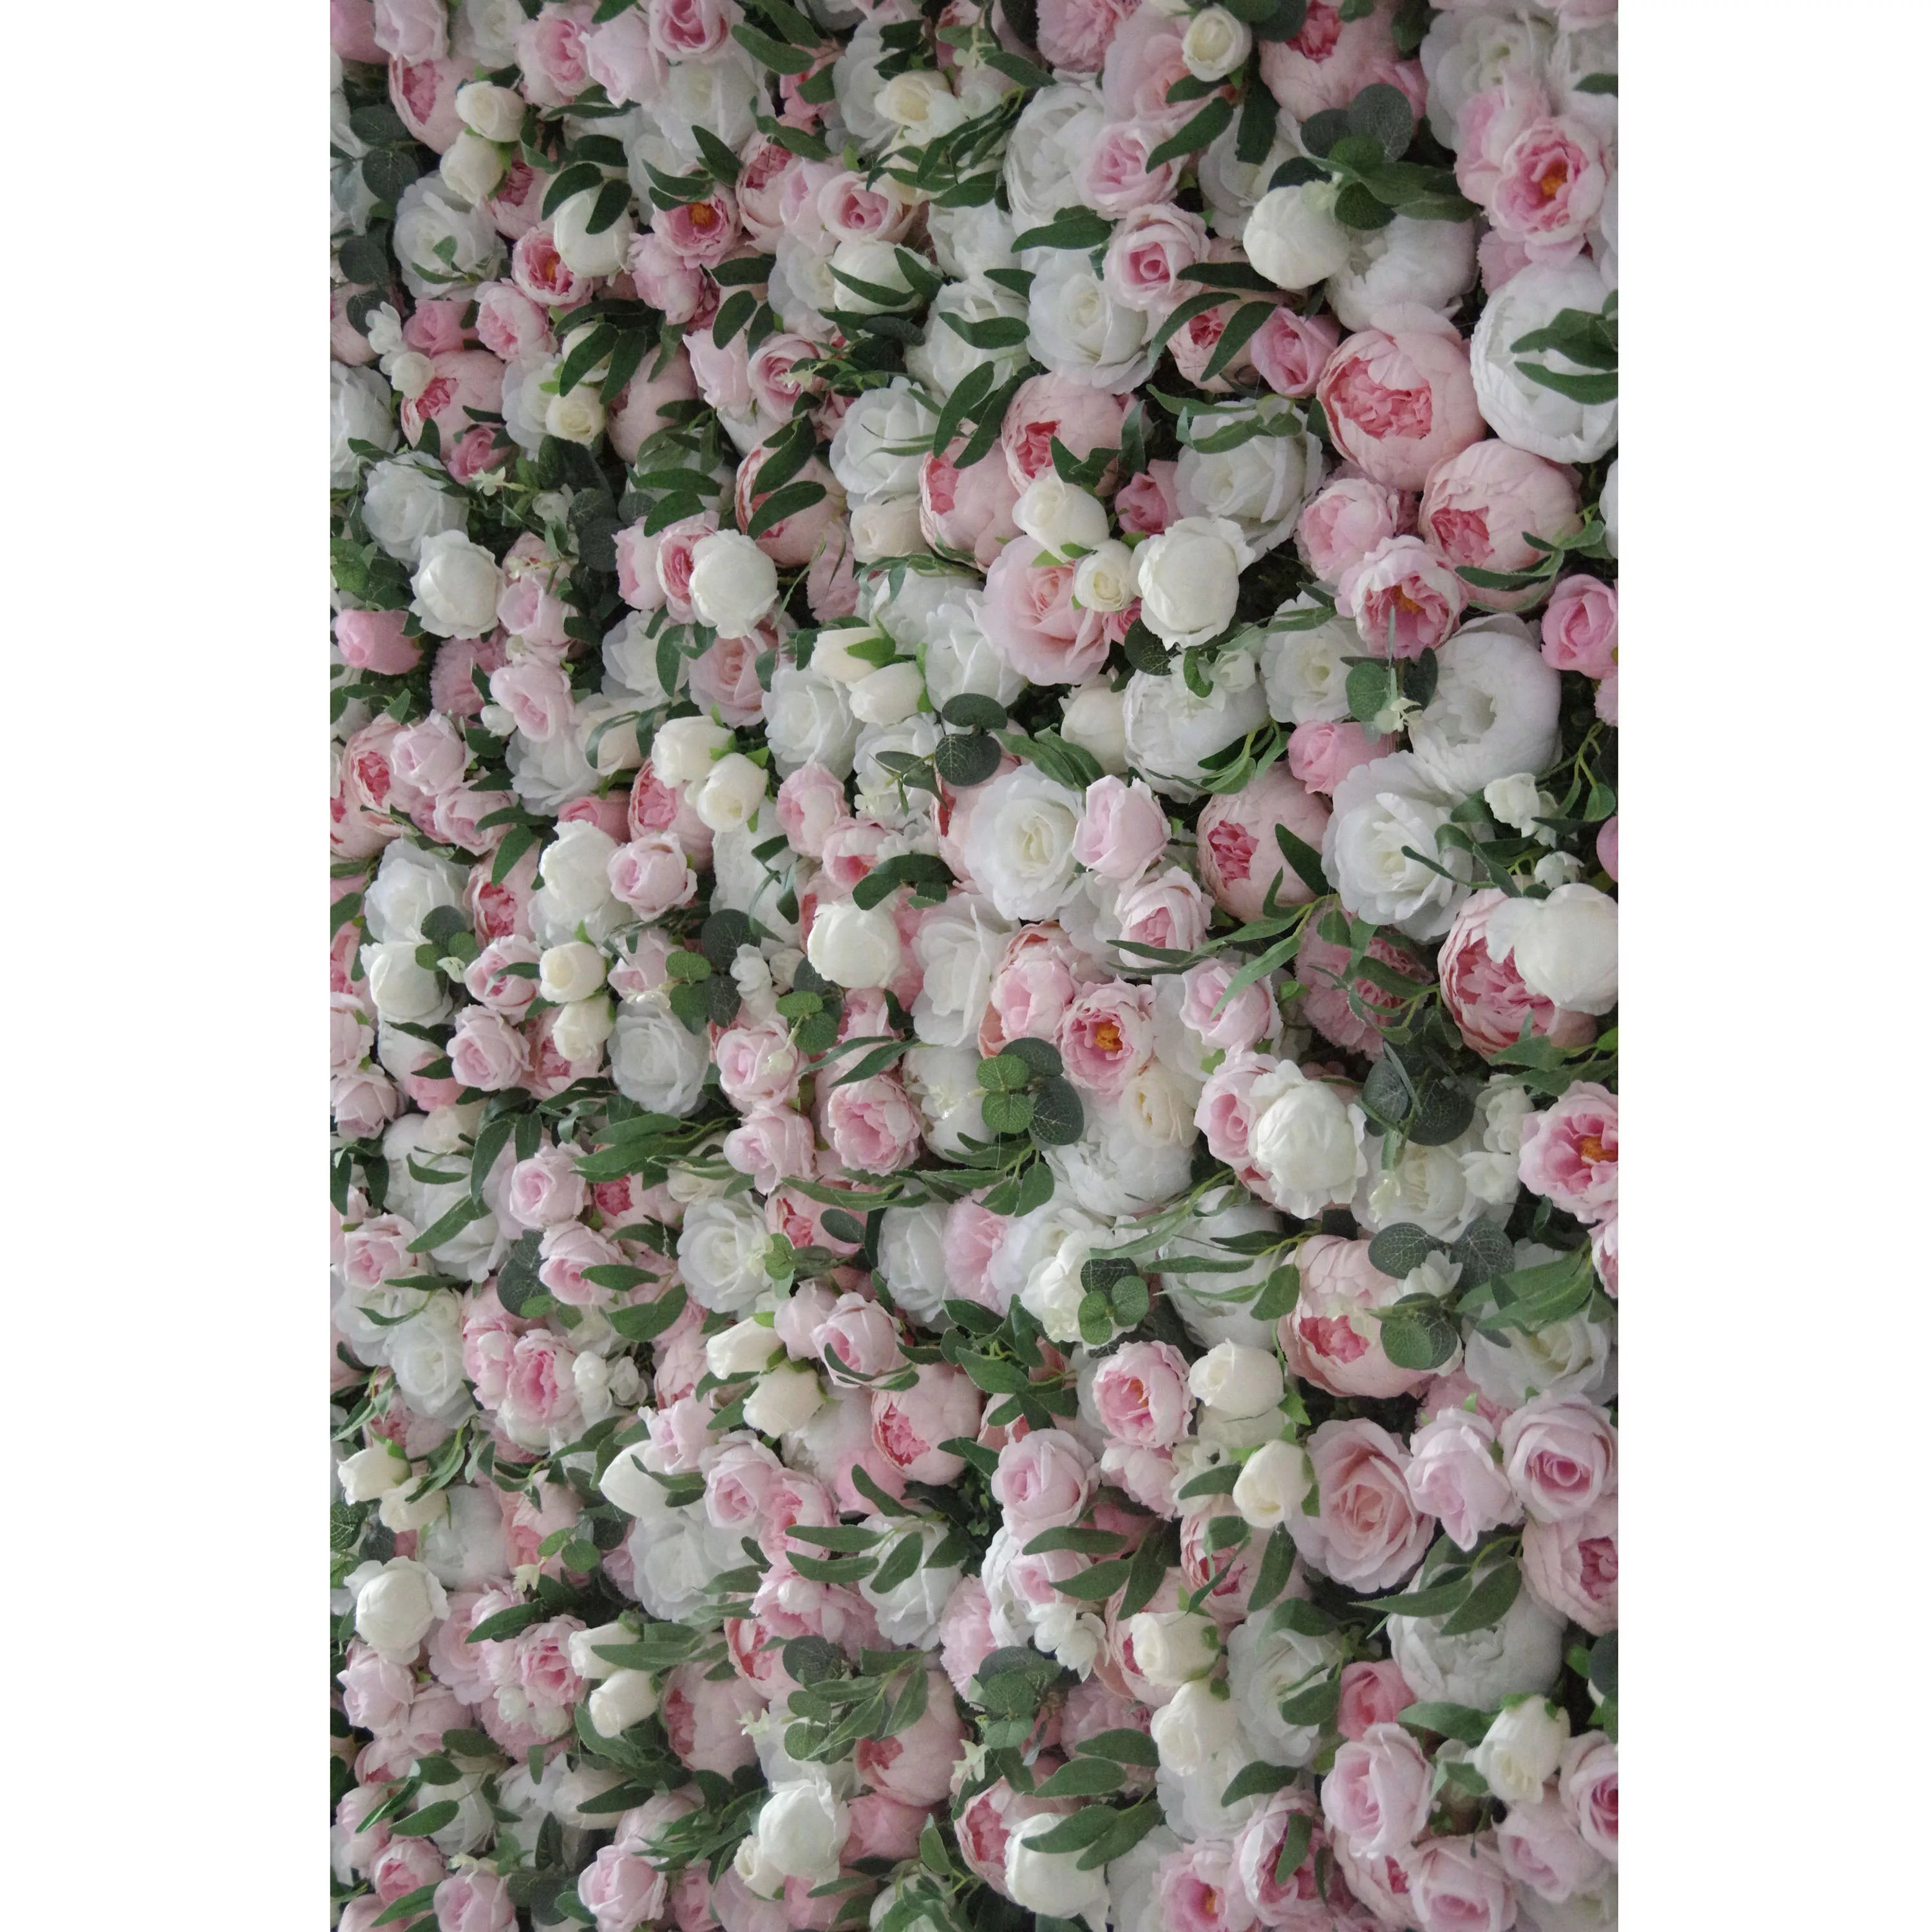 Valar Flowers Roll Up Fabric Artificial Mixed Pink and White Floral Wall for Wedding Backdrop, Floral Party Decor, Event Photography1